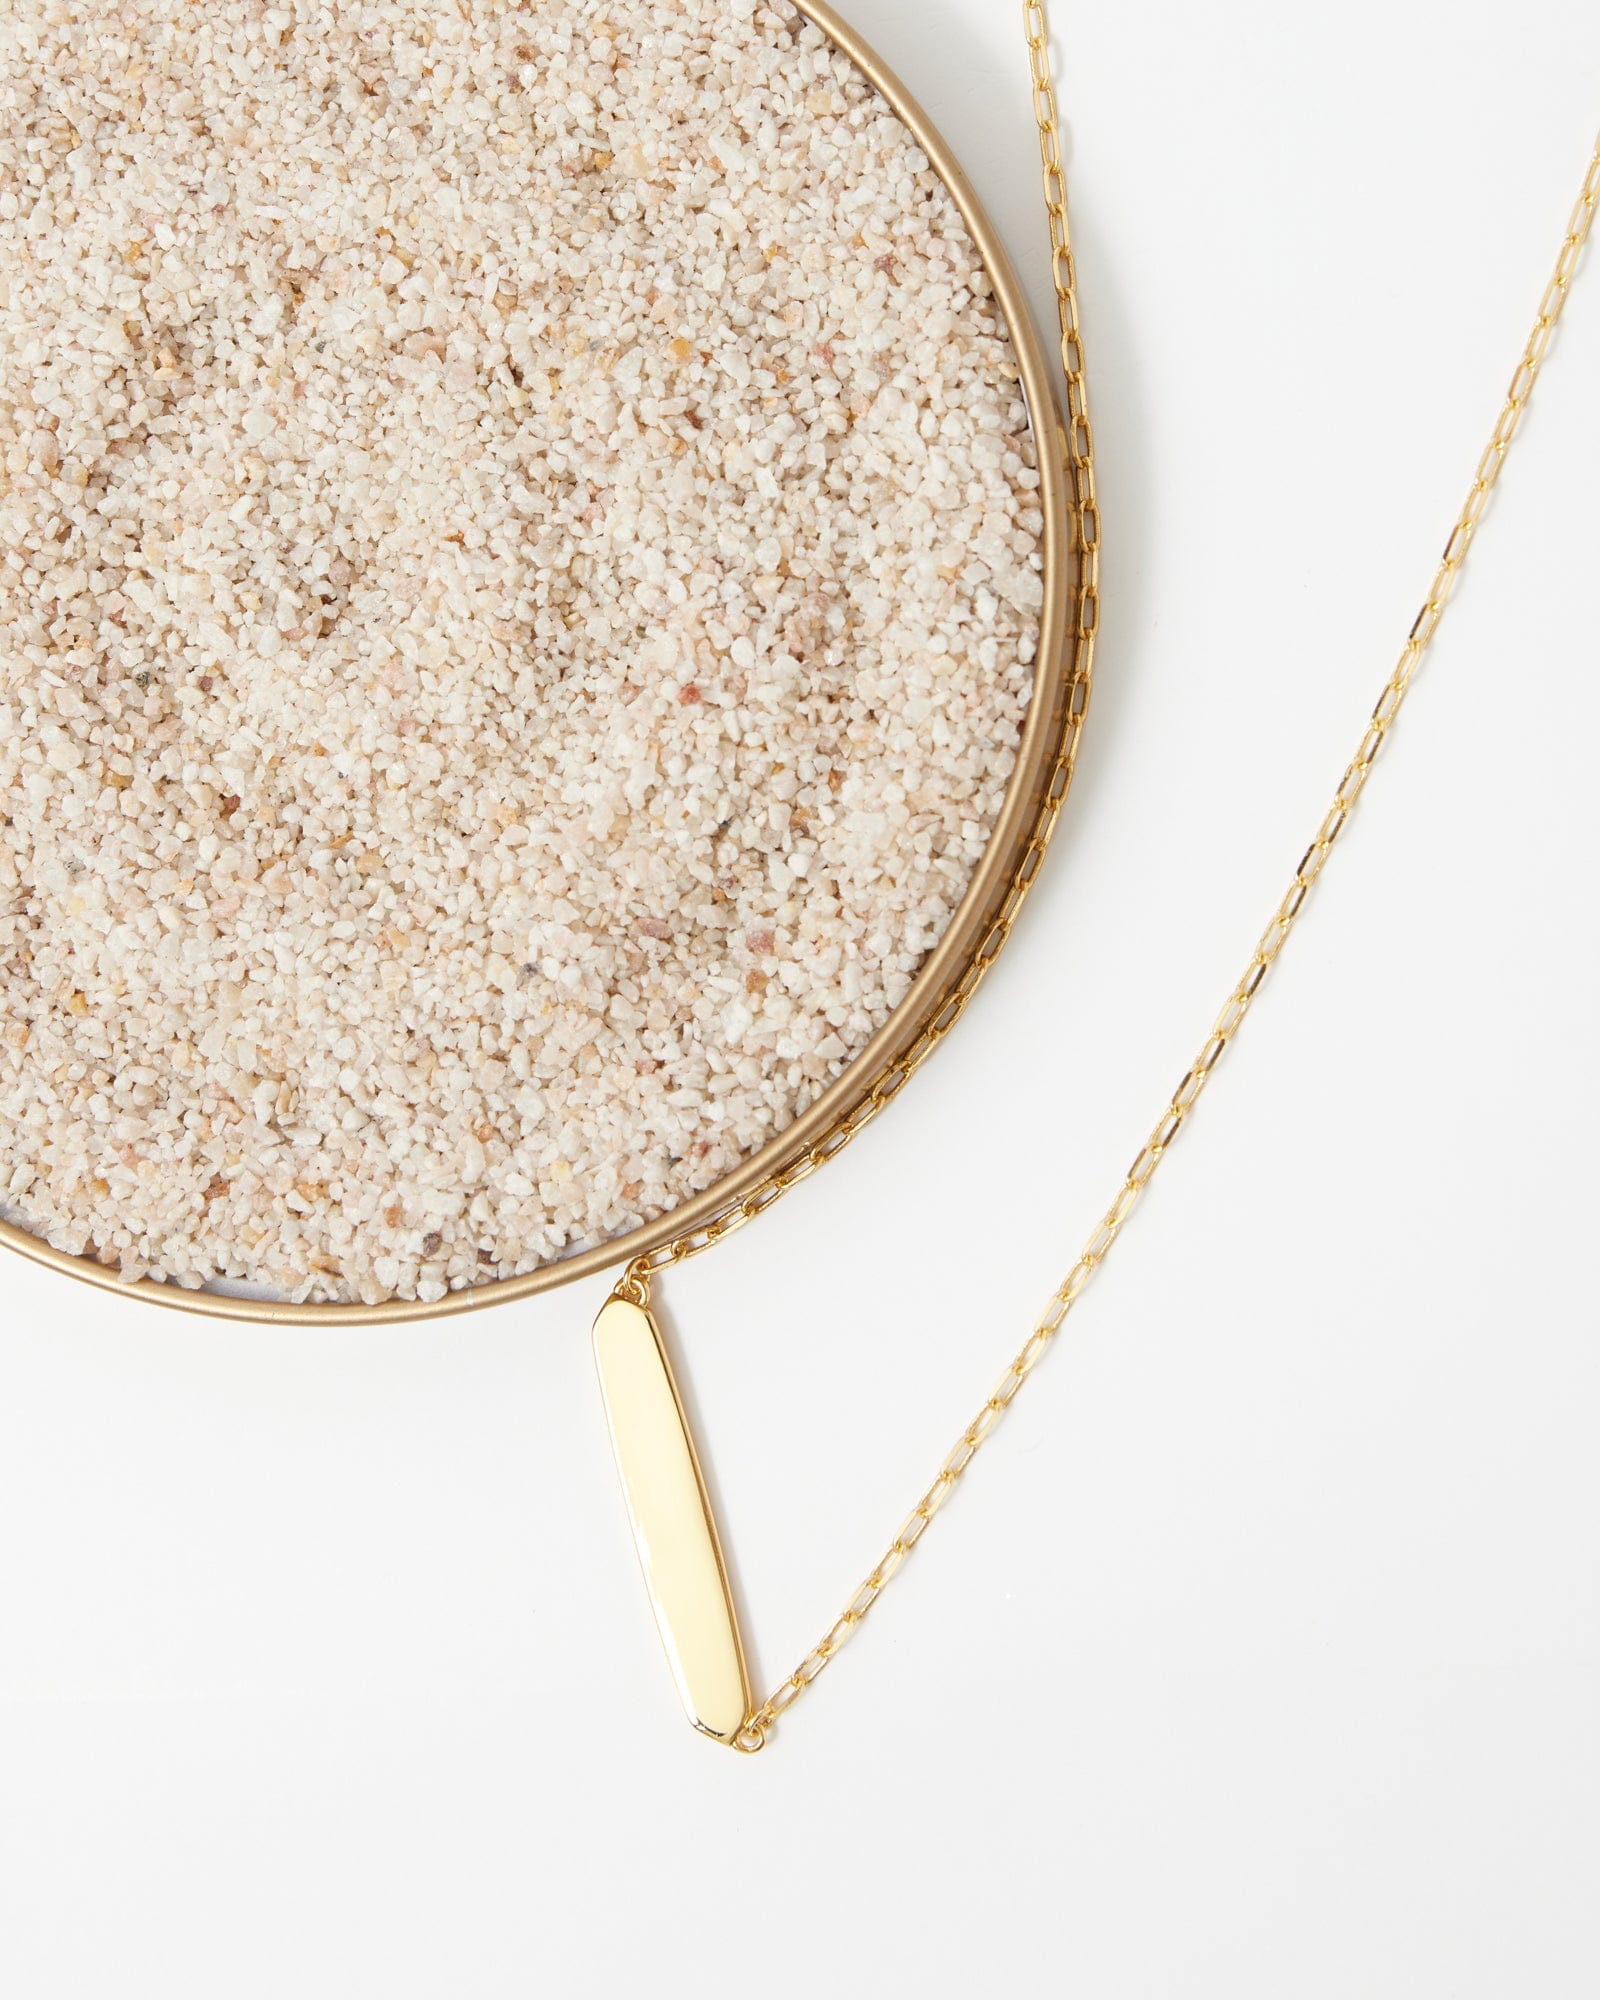 Gold necklace with plain gold bar